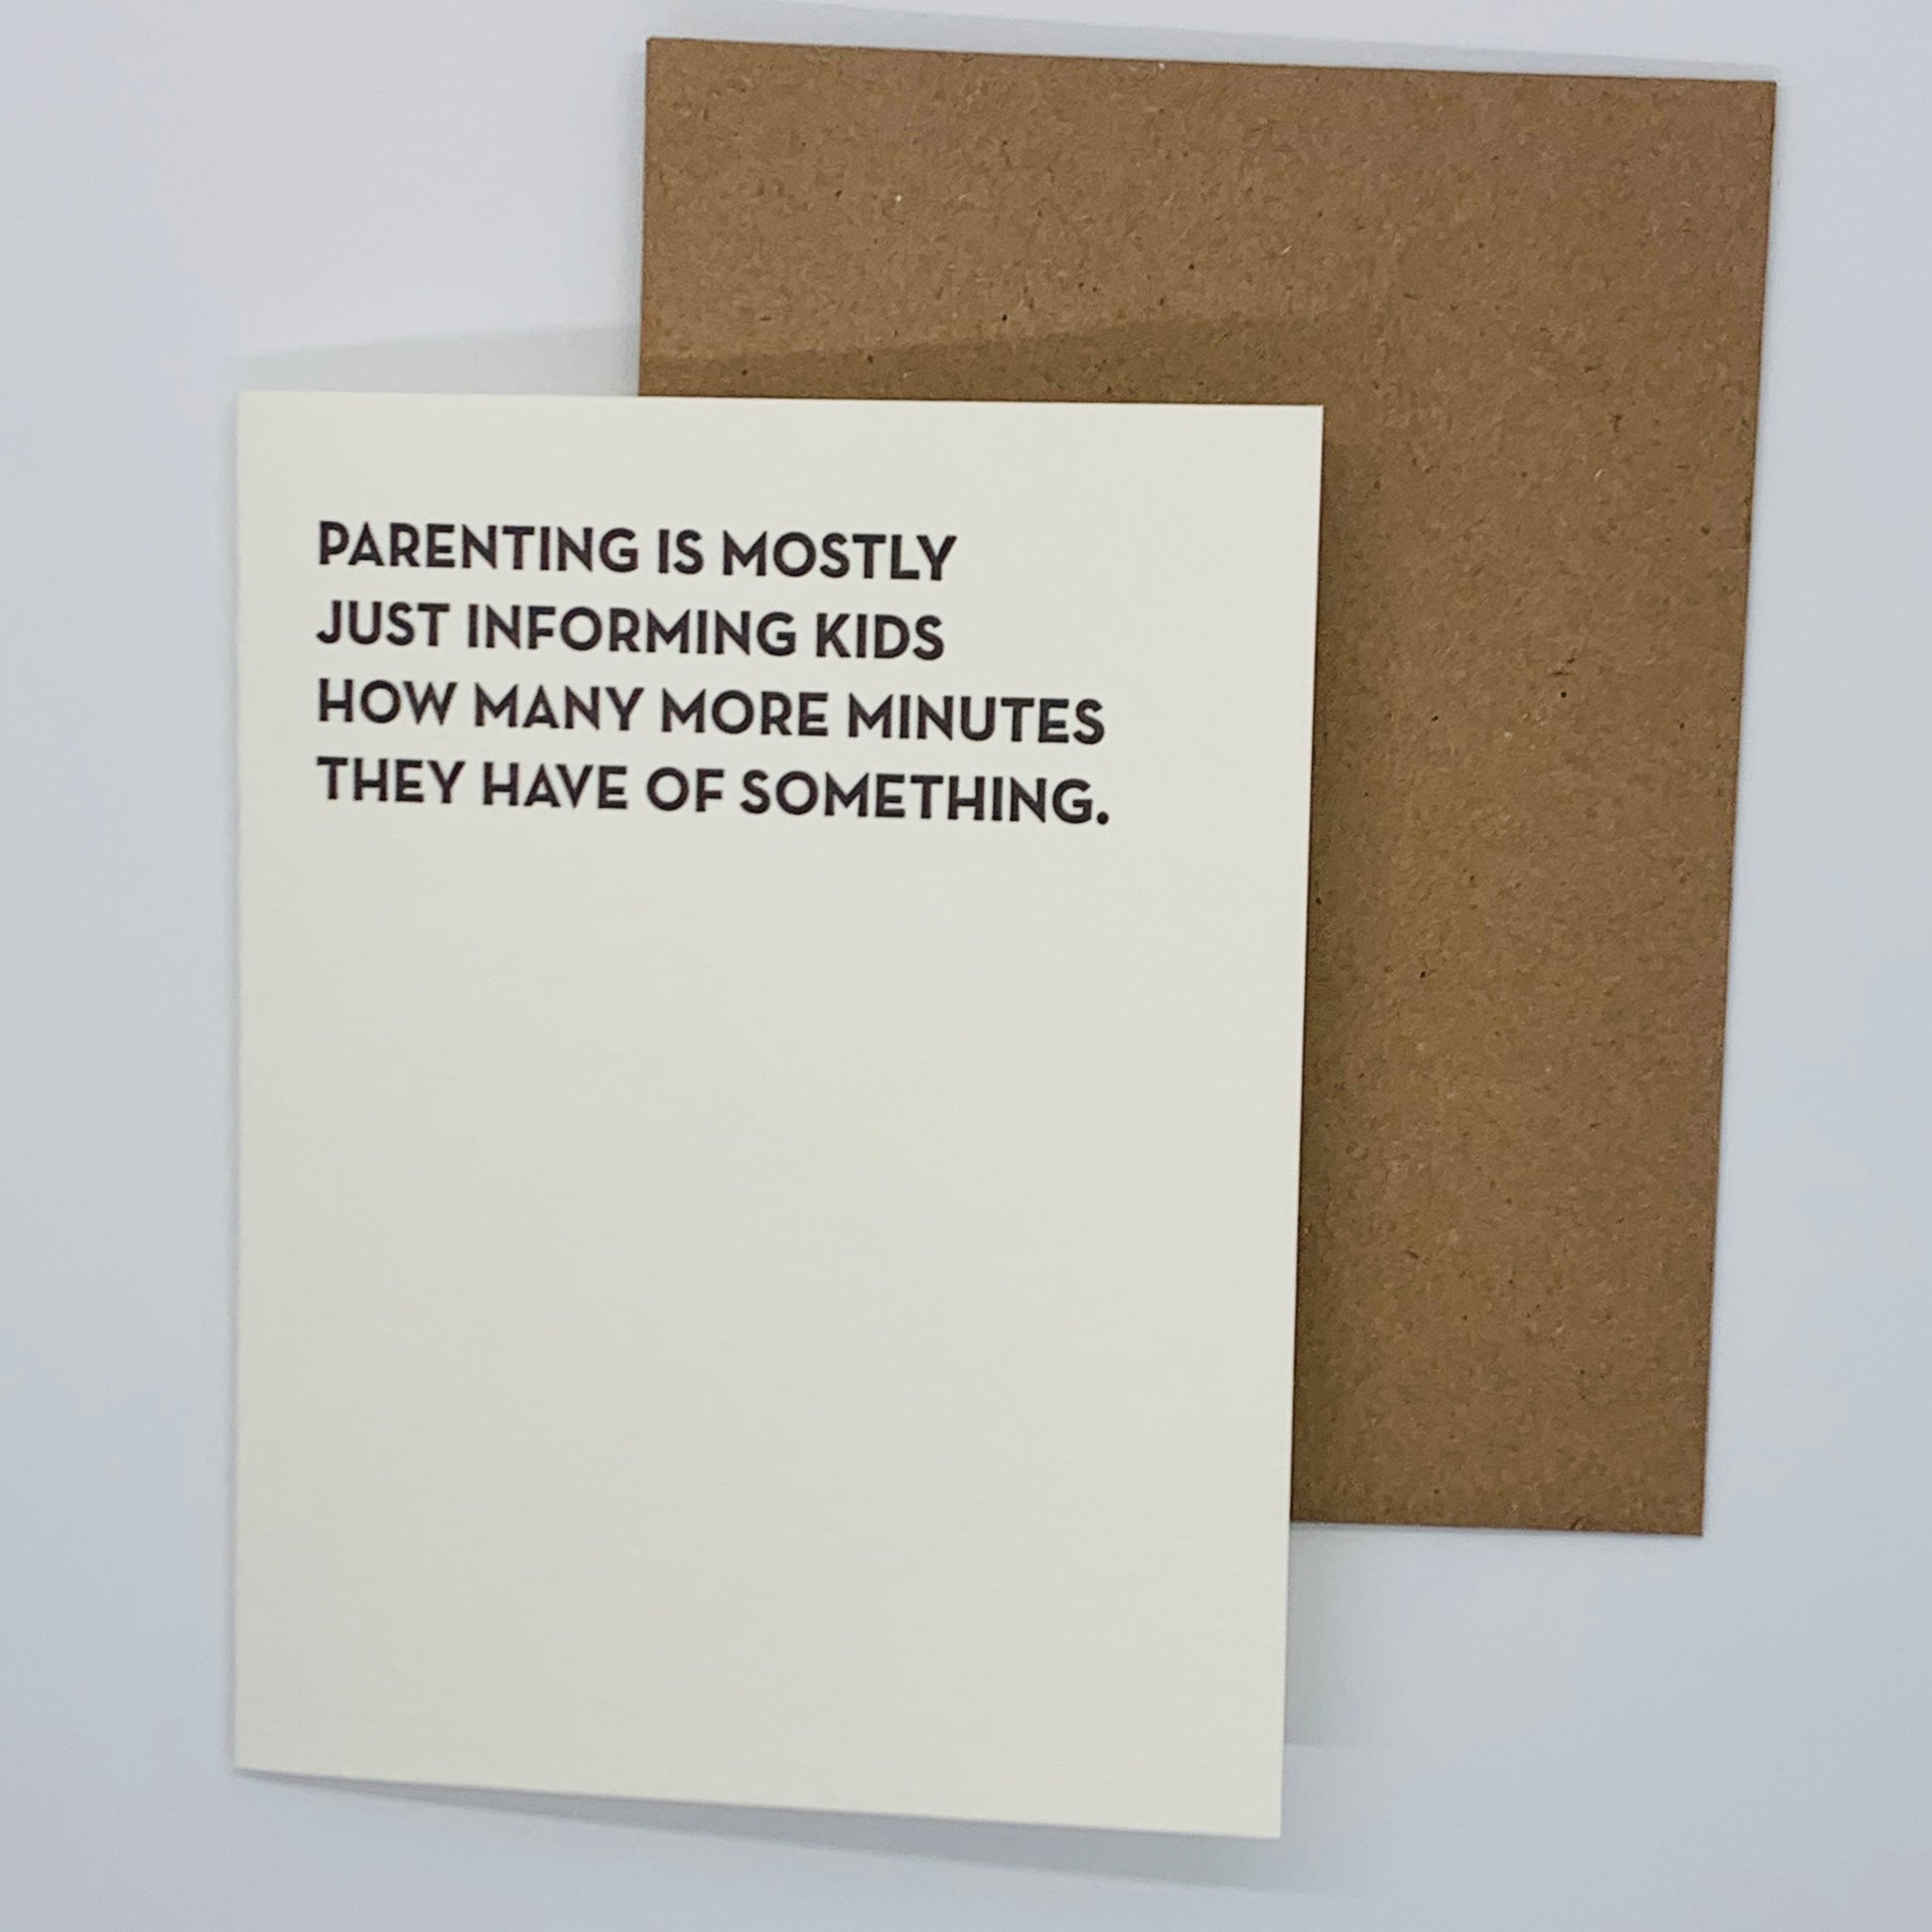 single card black text. Parenting is mostly just informing kids how many more minutes they have of something